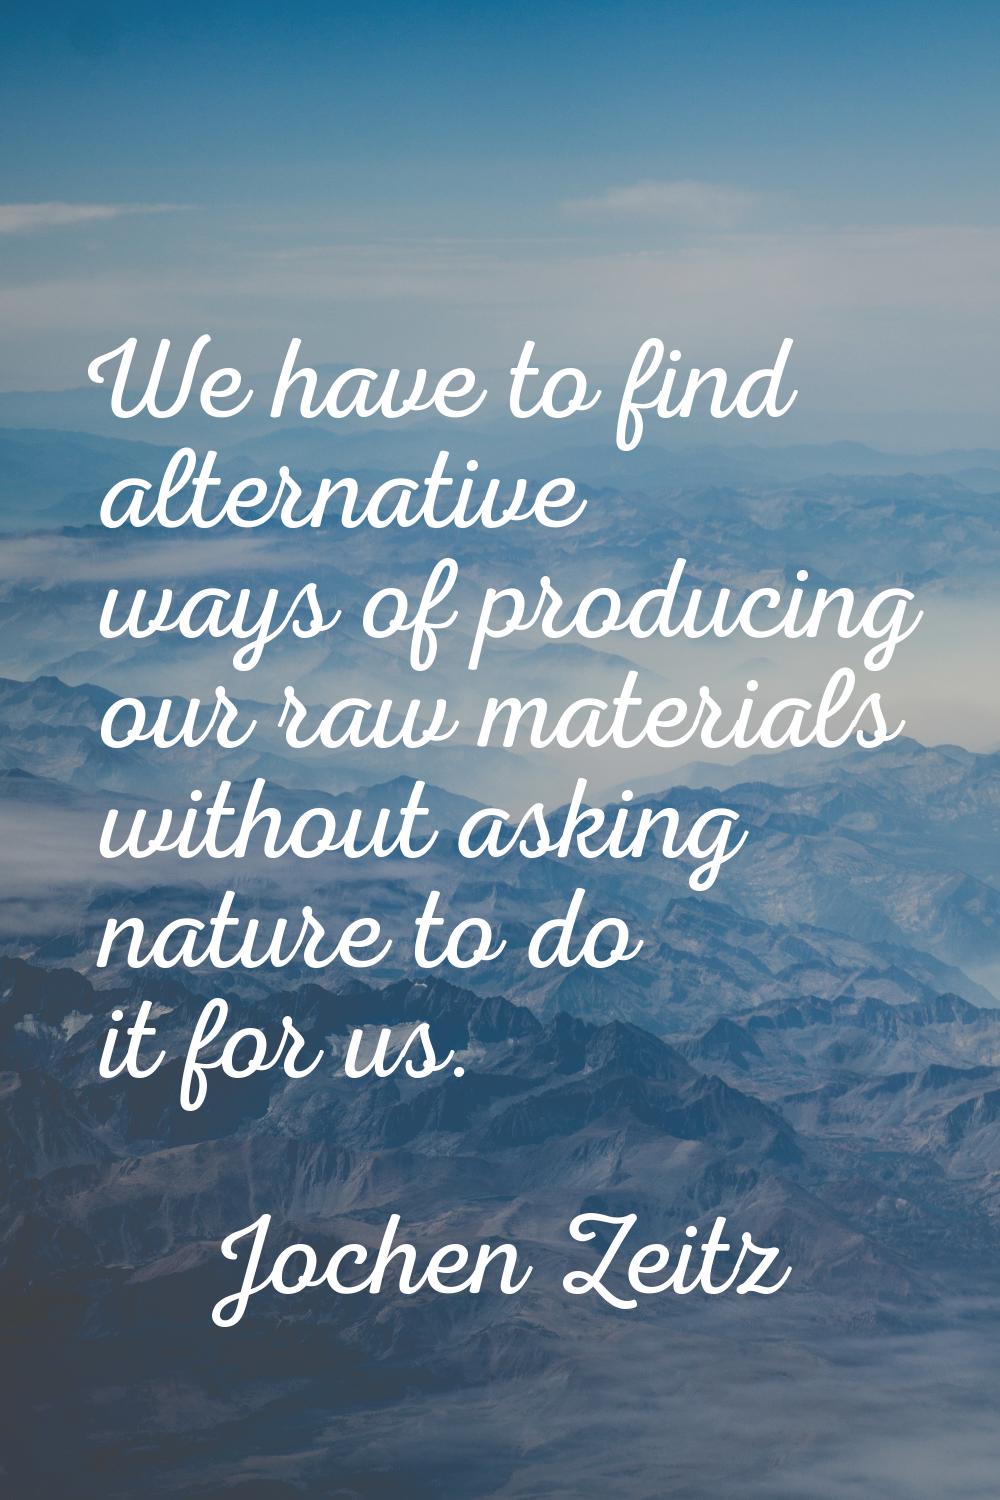 We have to find alternative ways of producing our raw materials without asking nature to do it for 